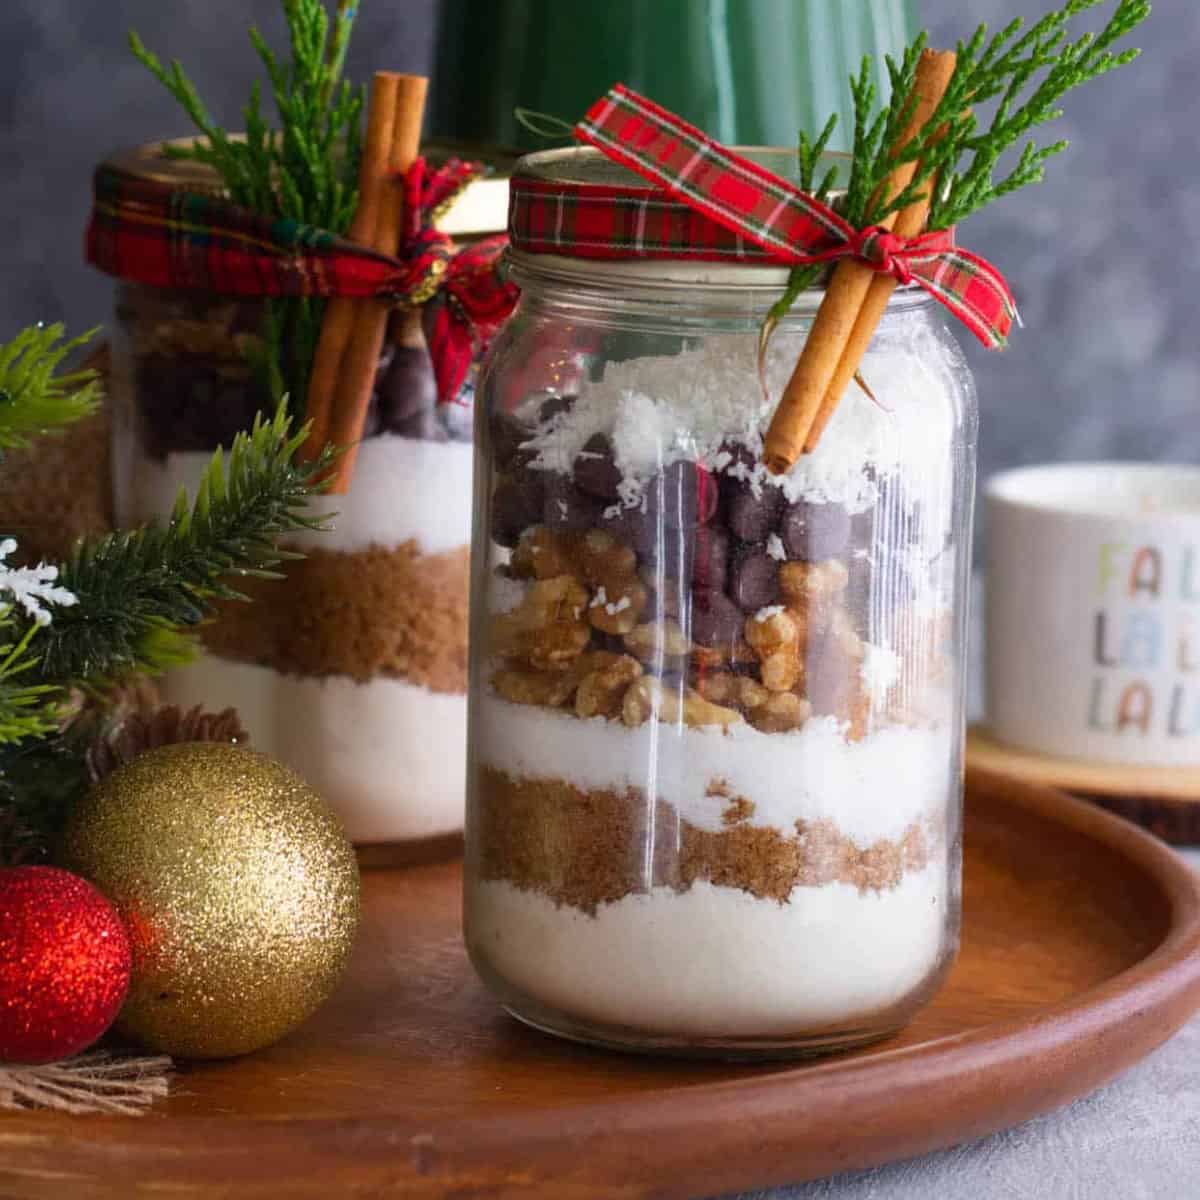 Here is a 15-minute tutorial for DIY cookie mix that you can customize to your liking. If you're looking for a fun gift idea for the holidays, give a jar of homemade cookie mix to your favorite foodie! 
